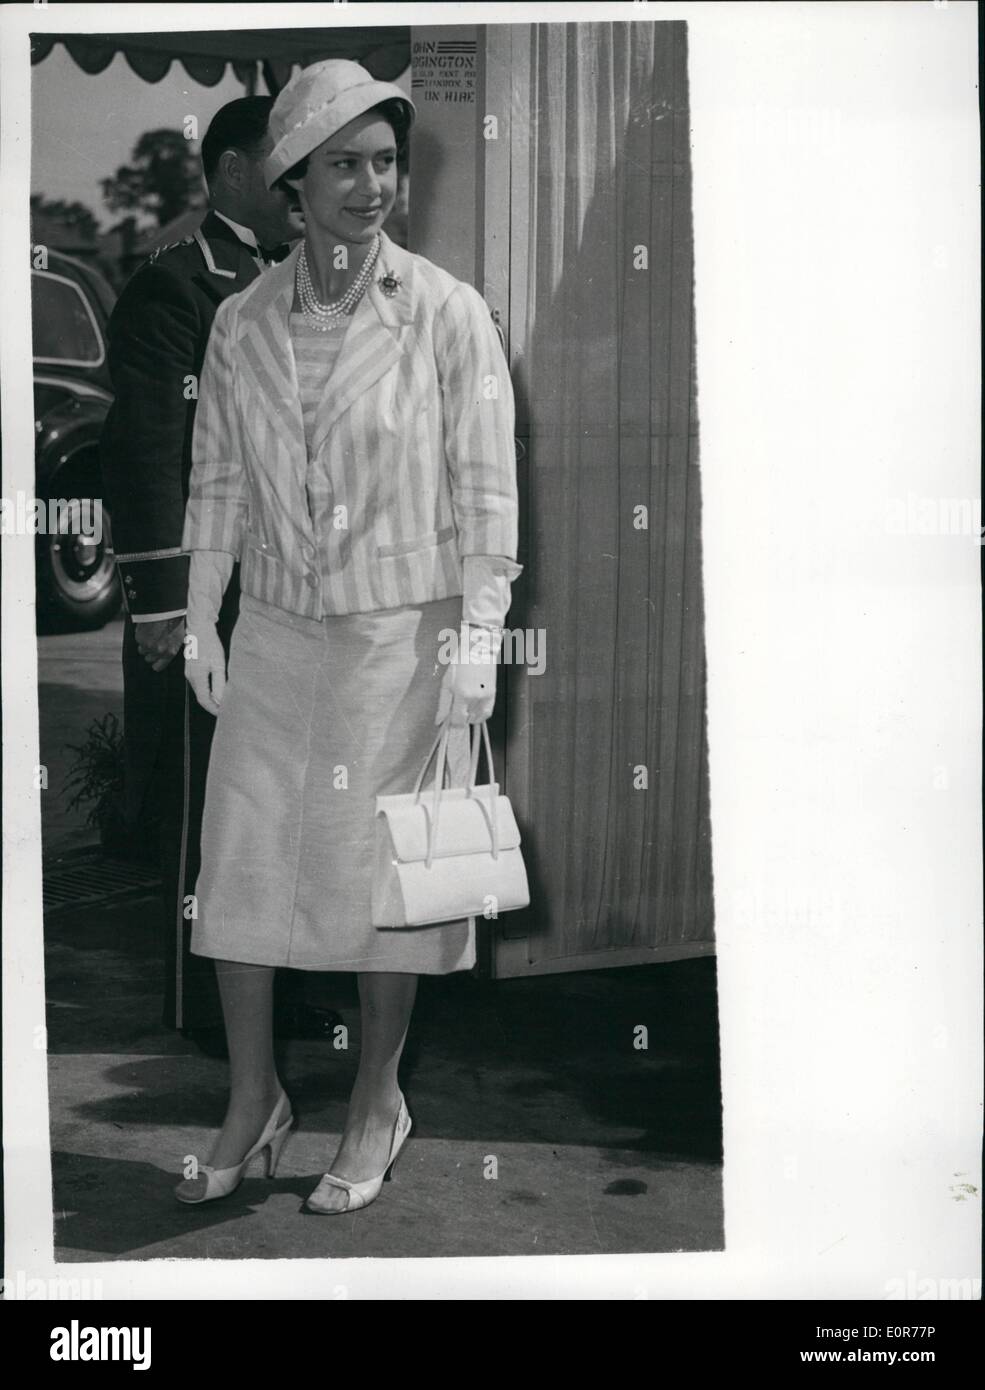 May 05, 1958 - The ''Sunshine Prince'' Princess Margaret At Greenford: Princess Margaret wore a fashionable pale silk summery outfit when she visited Greenford, Middlesex today. Her striped blaser was worn over a matching blouse with a skirt picking up the darker stripes. Her peep-toe sandals and large satin hat with turn - down brim completed the ensemble. Stock Photo